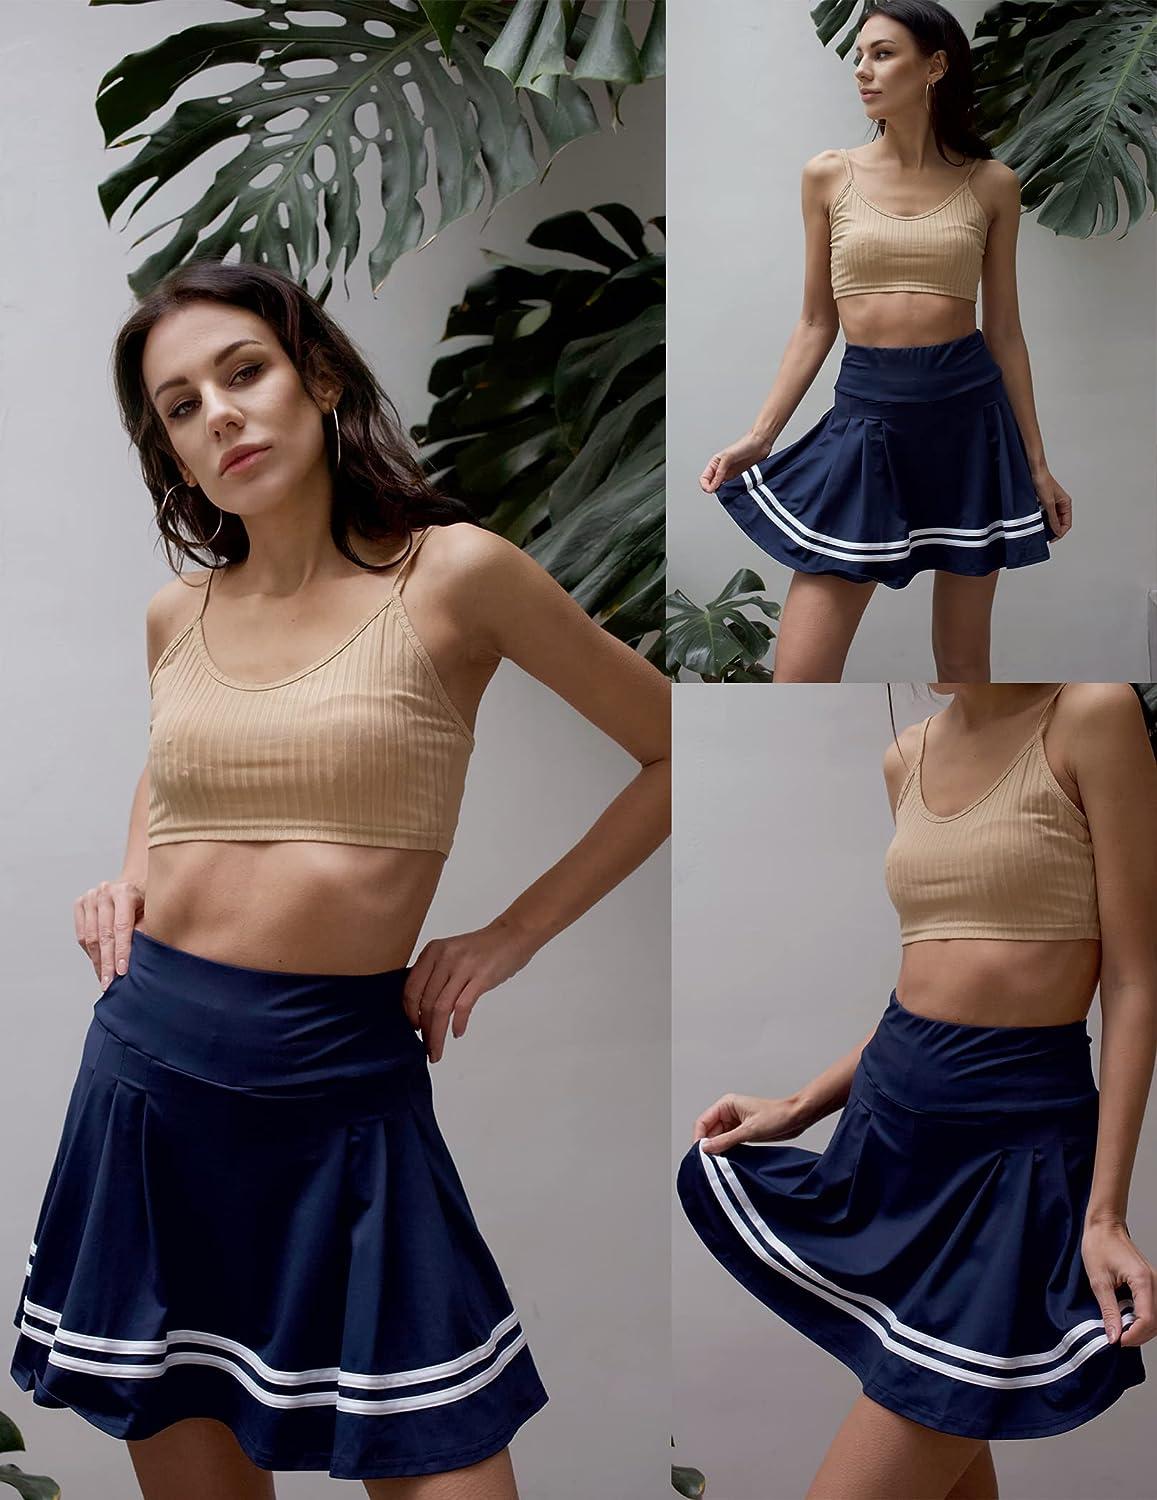 athletic skort outfit - woman skort outfit - how to wear a skort 8